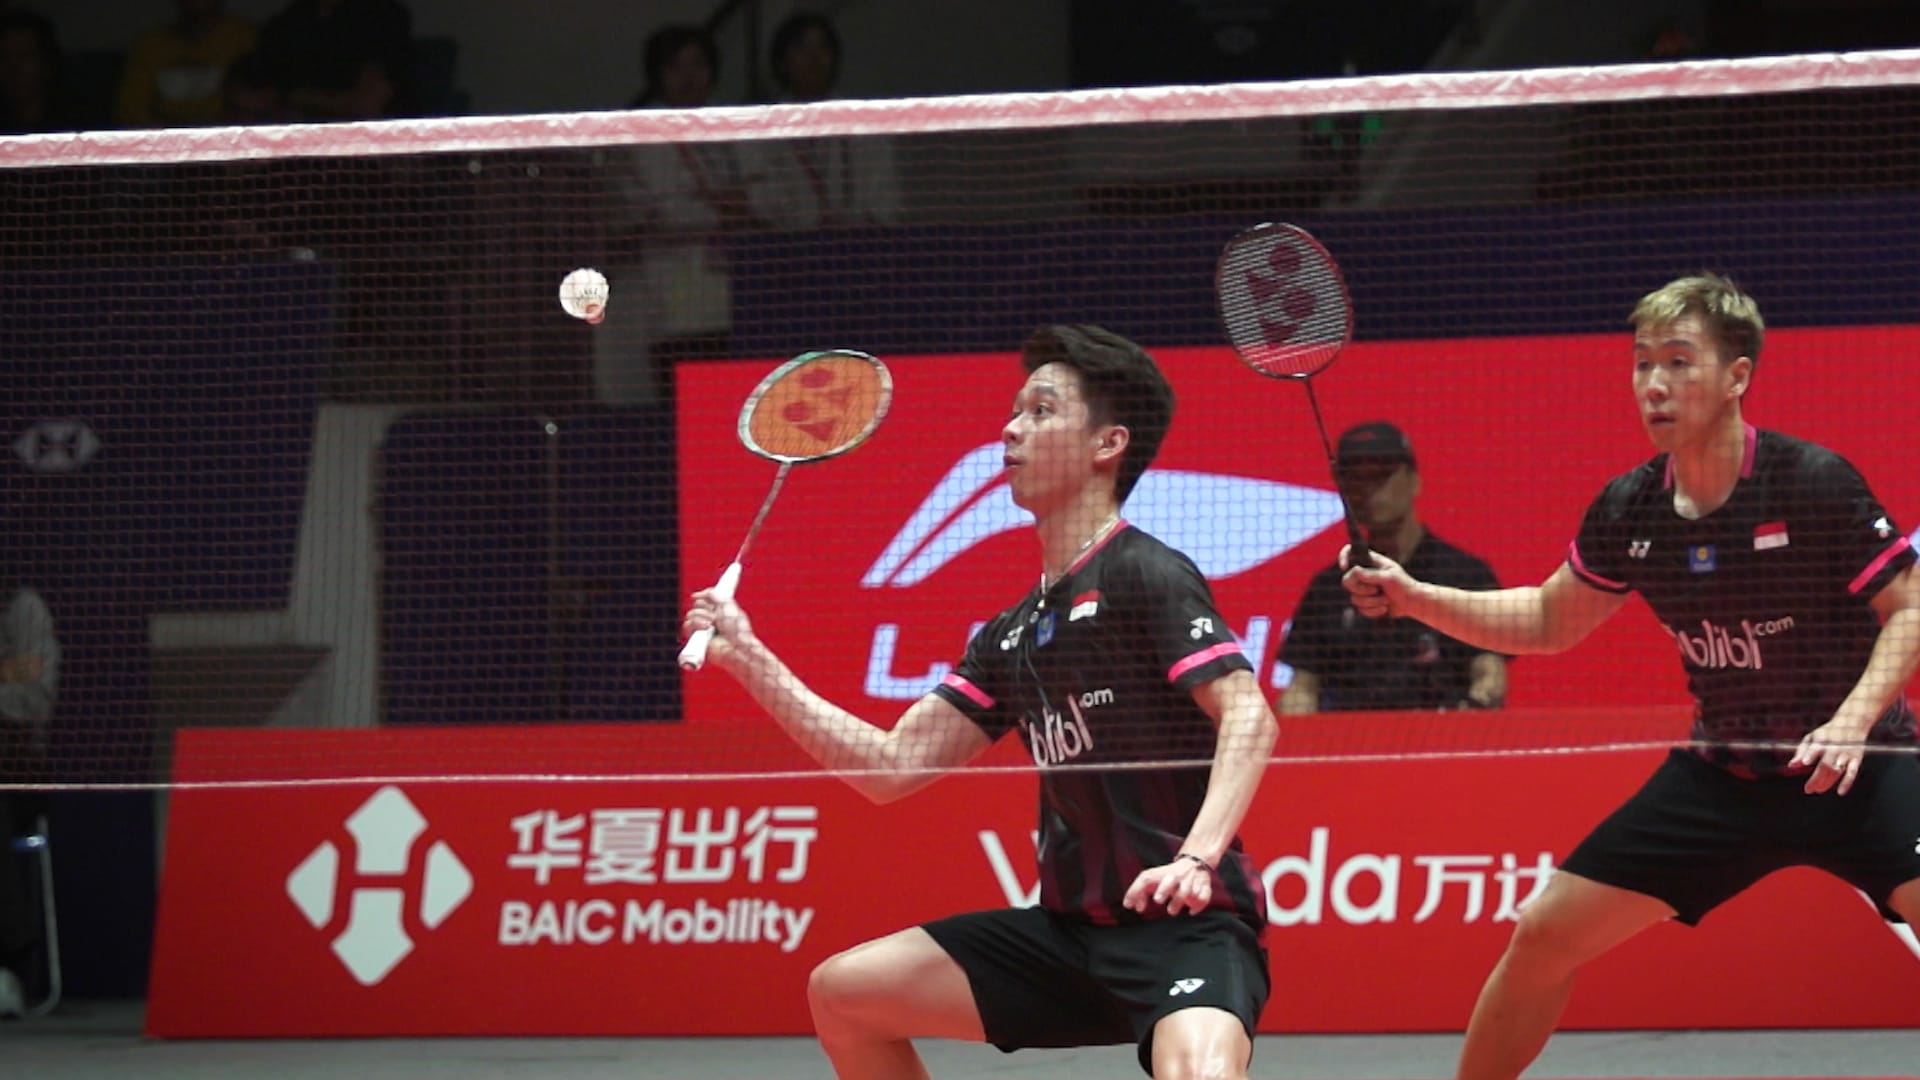 Badminton World Tour Finals 2022 Can Viktor Axelsen and An Seyoung defend their titles? How to watch live and schedule